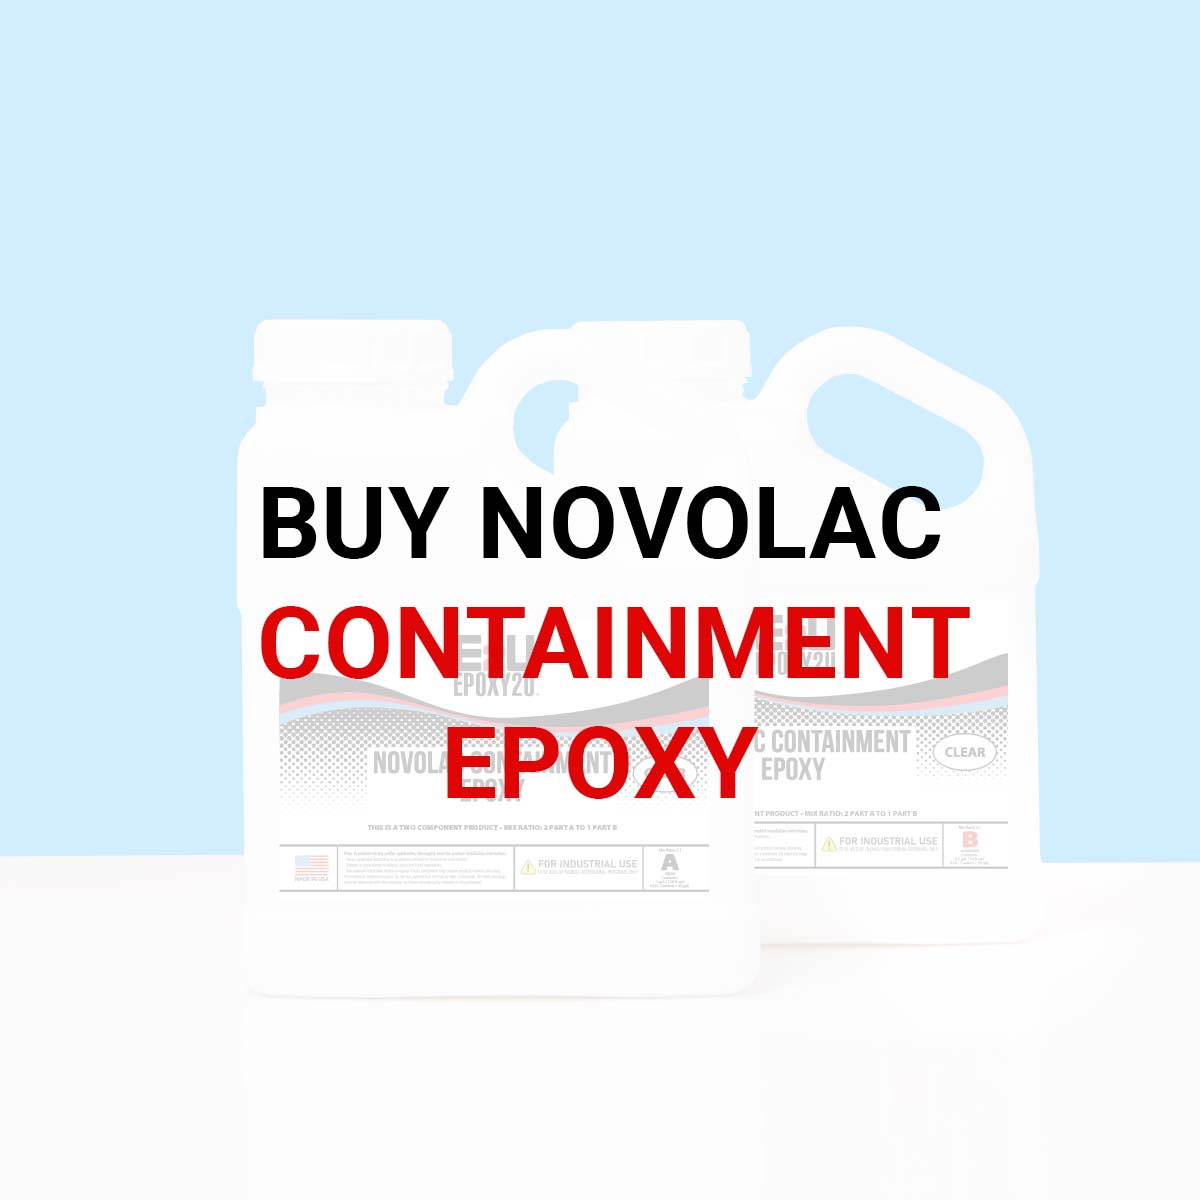 Product-NOVALOC-containment